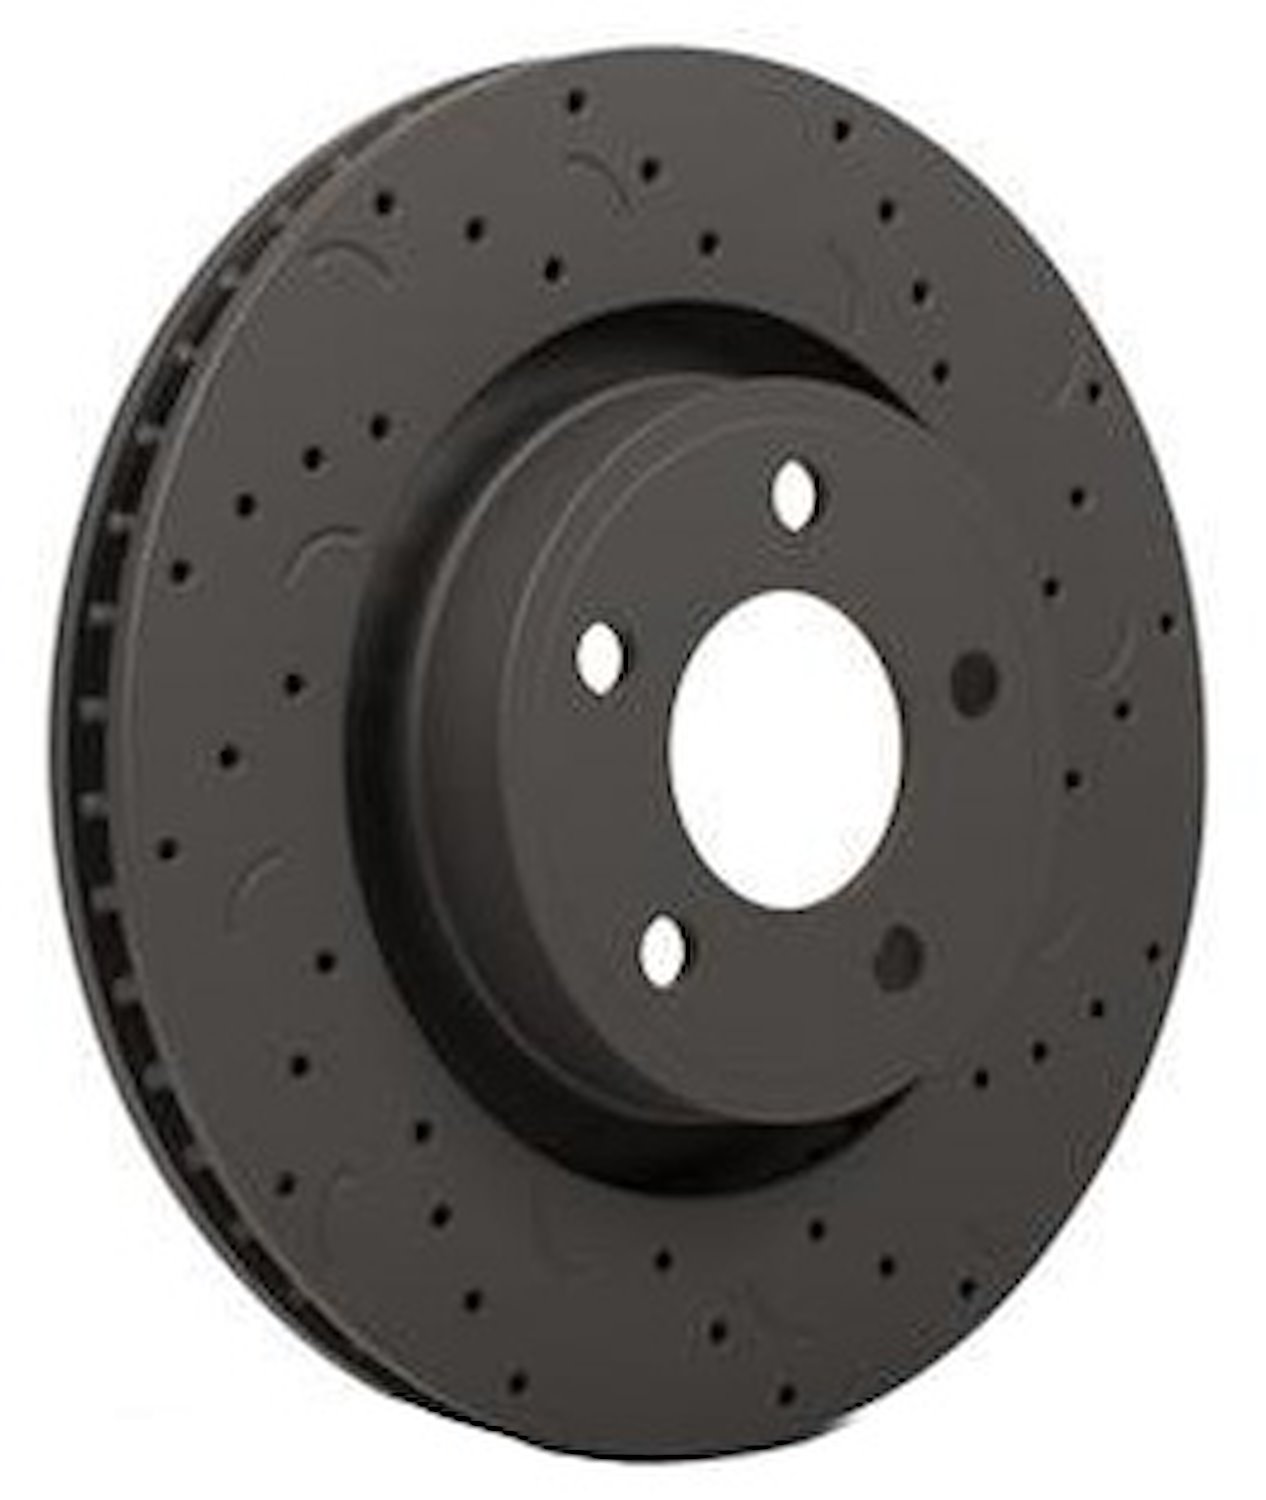 Talon Drilled and Slotted Rotors